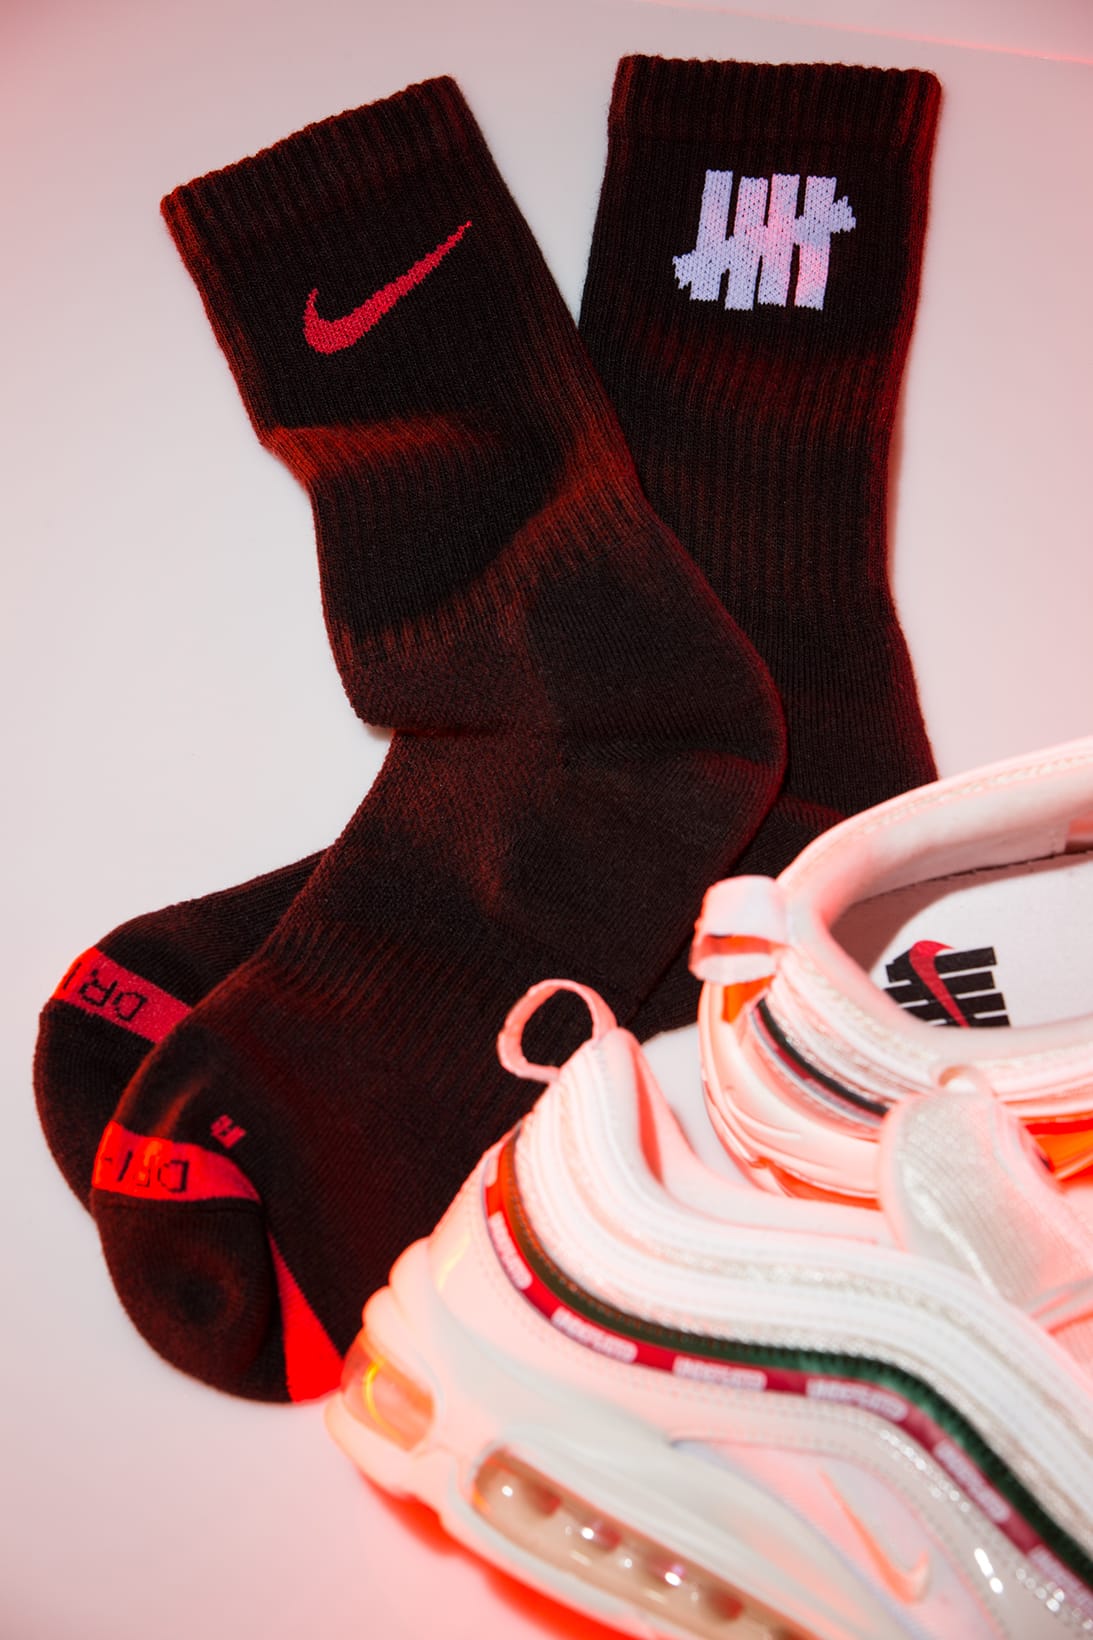 UNDEFEATED x Nike Air Max 97 Apparel 